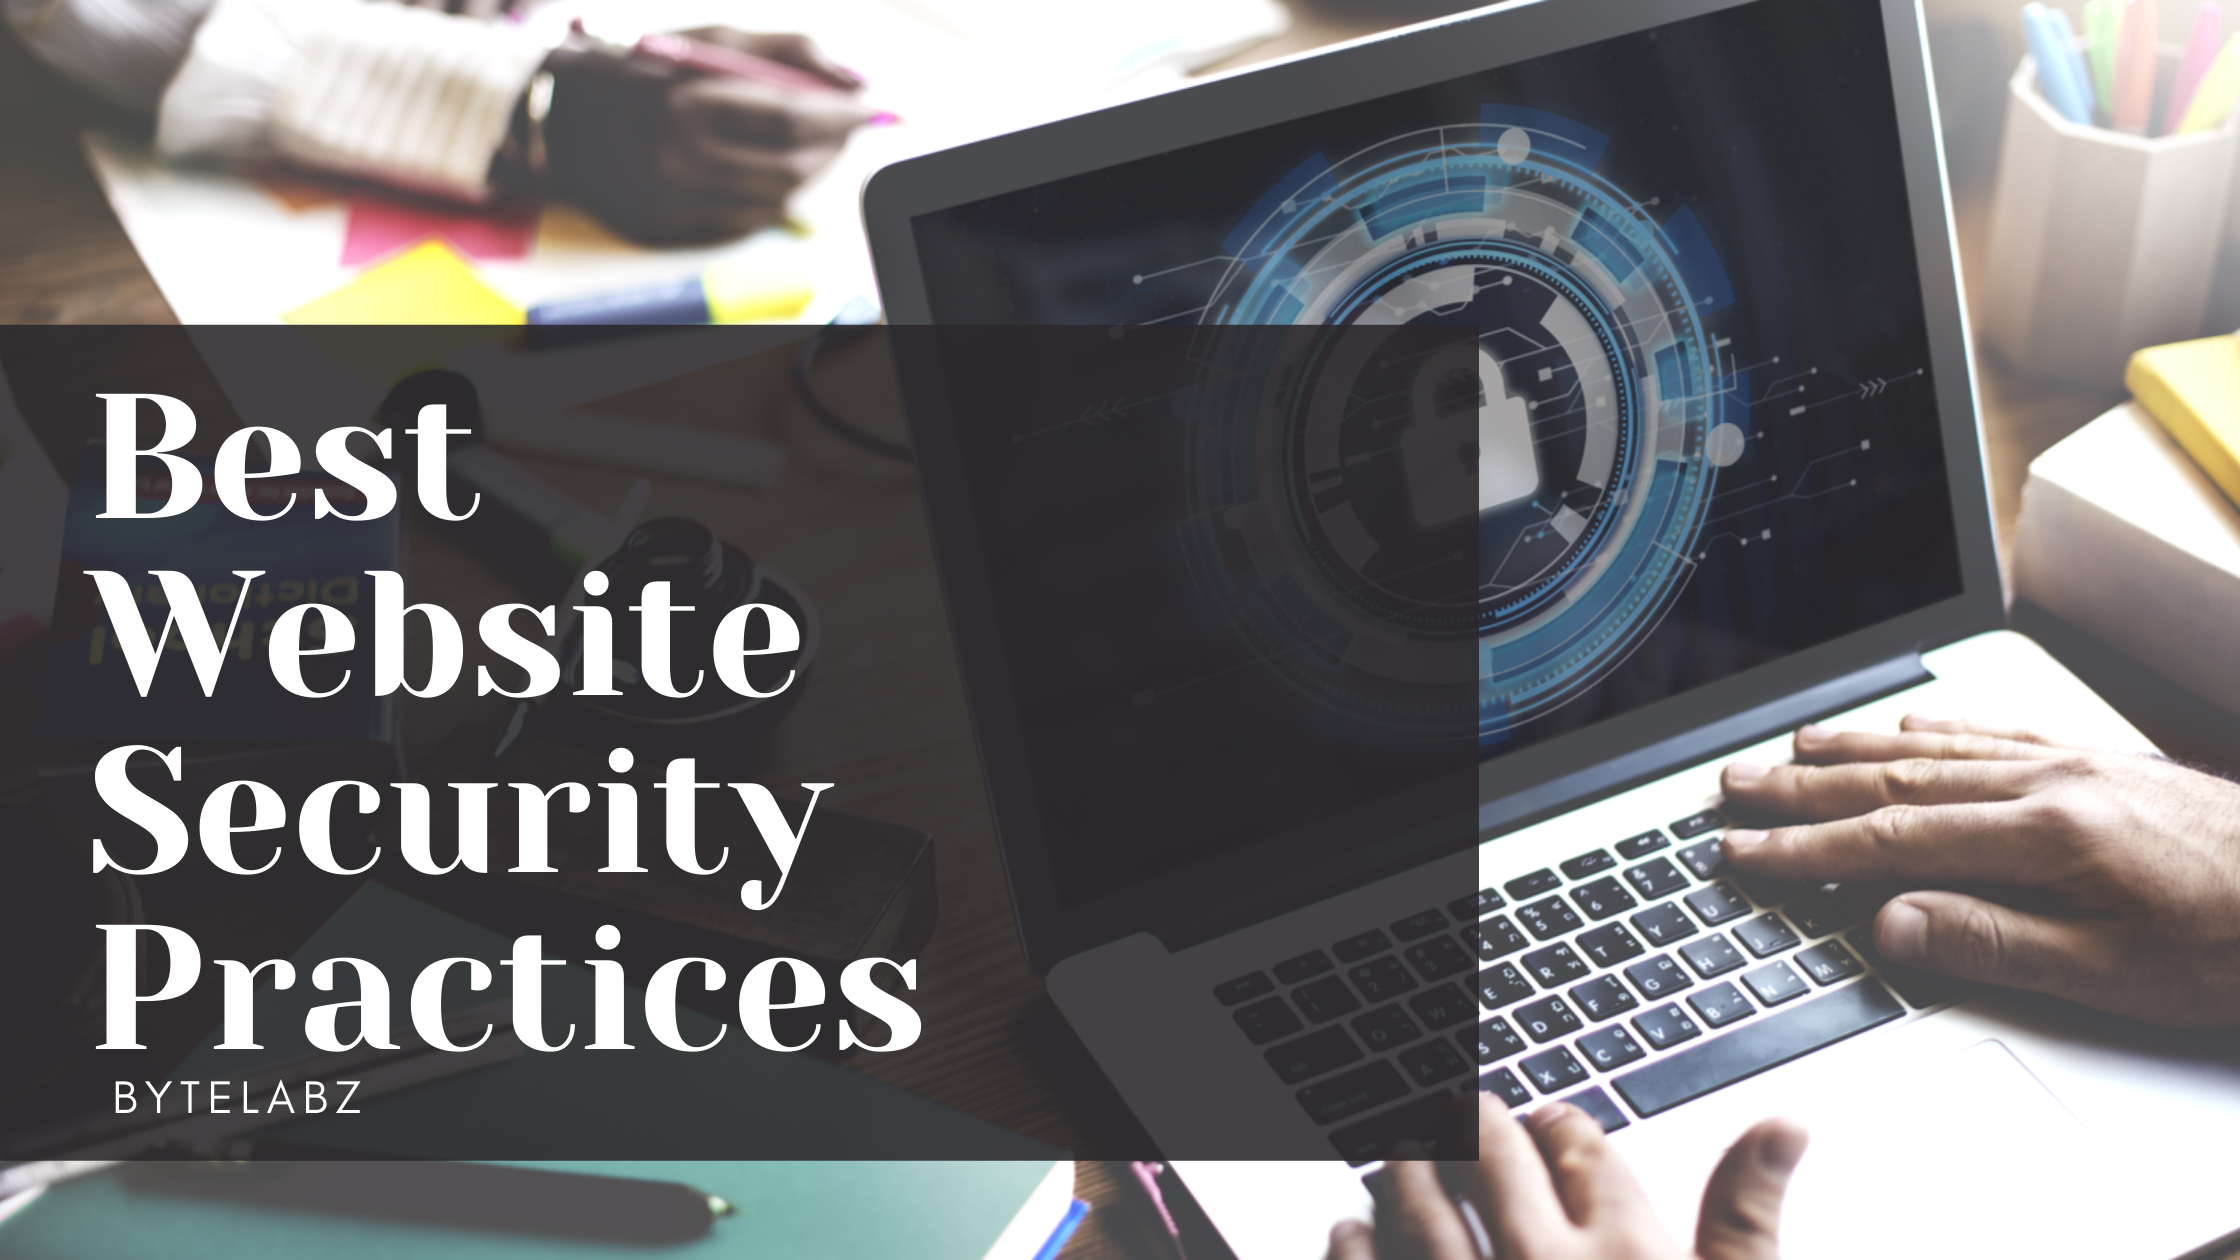 A Step-by-Step Guide to Keeping Your Website Safe.